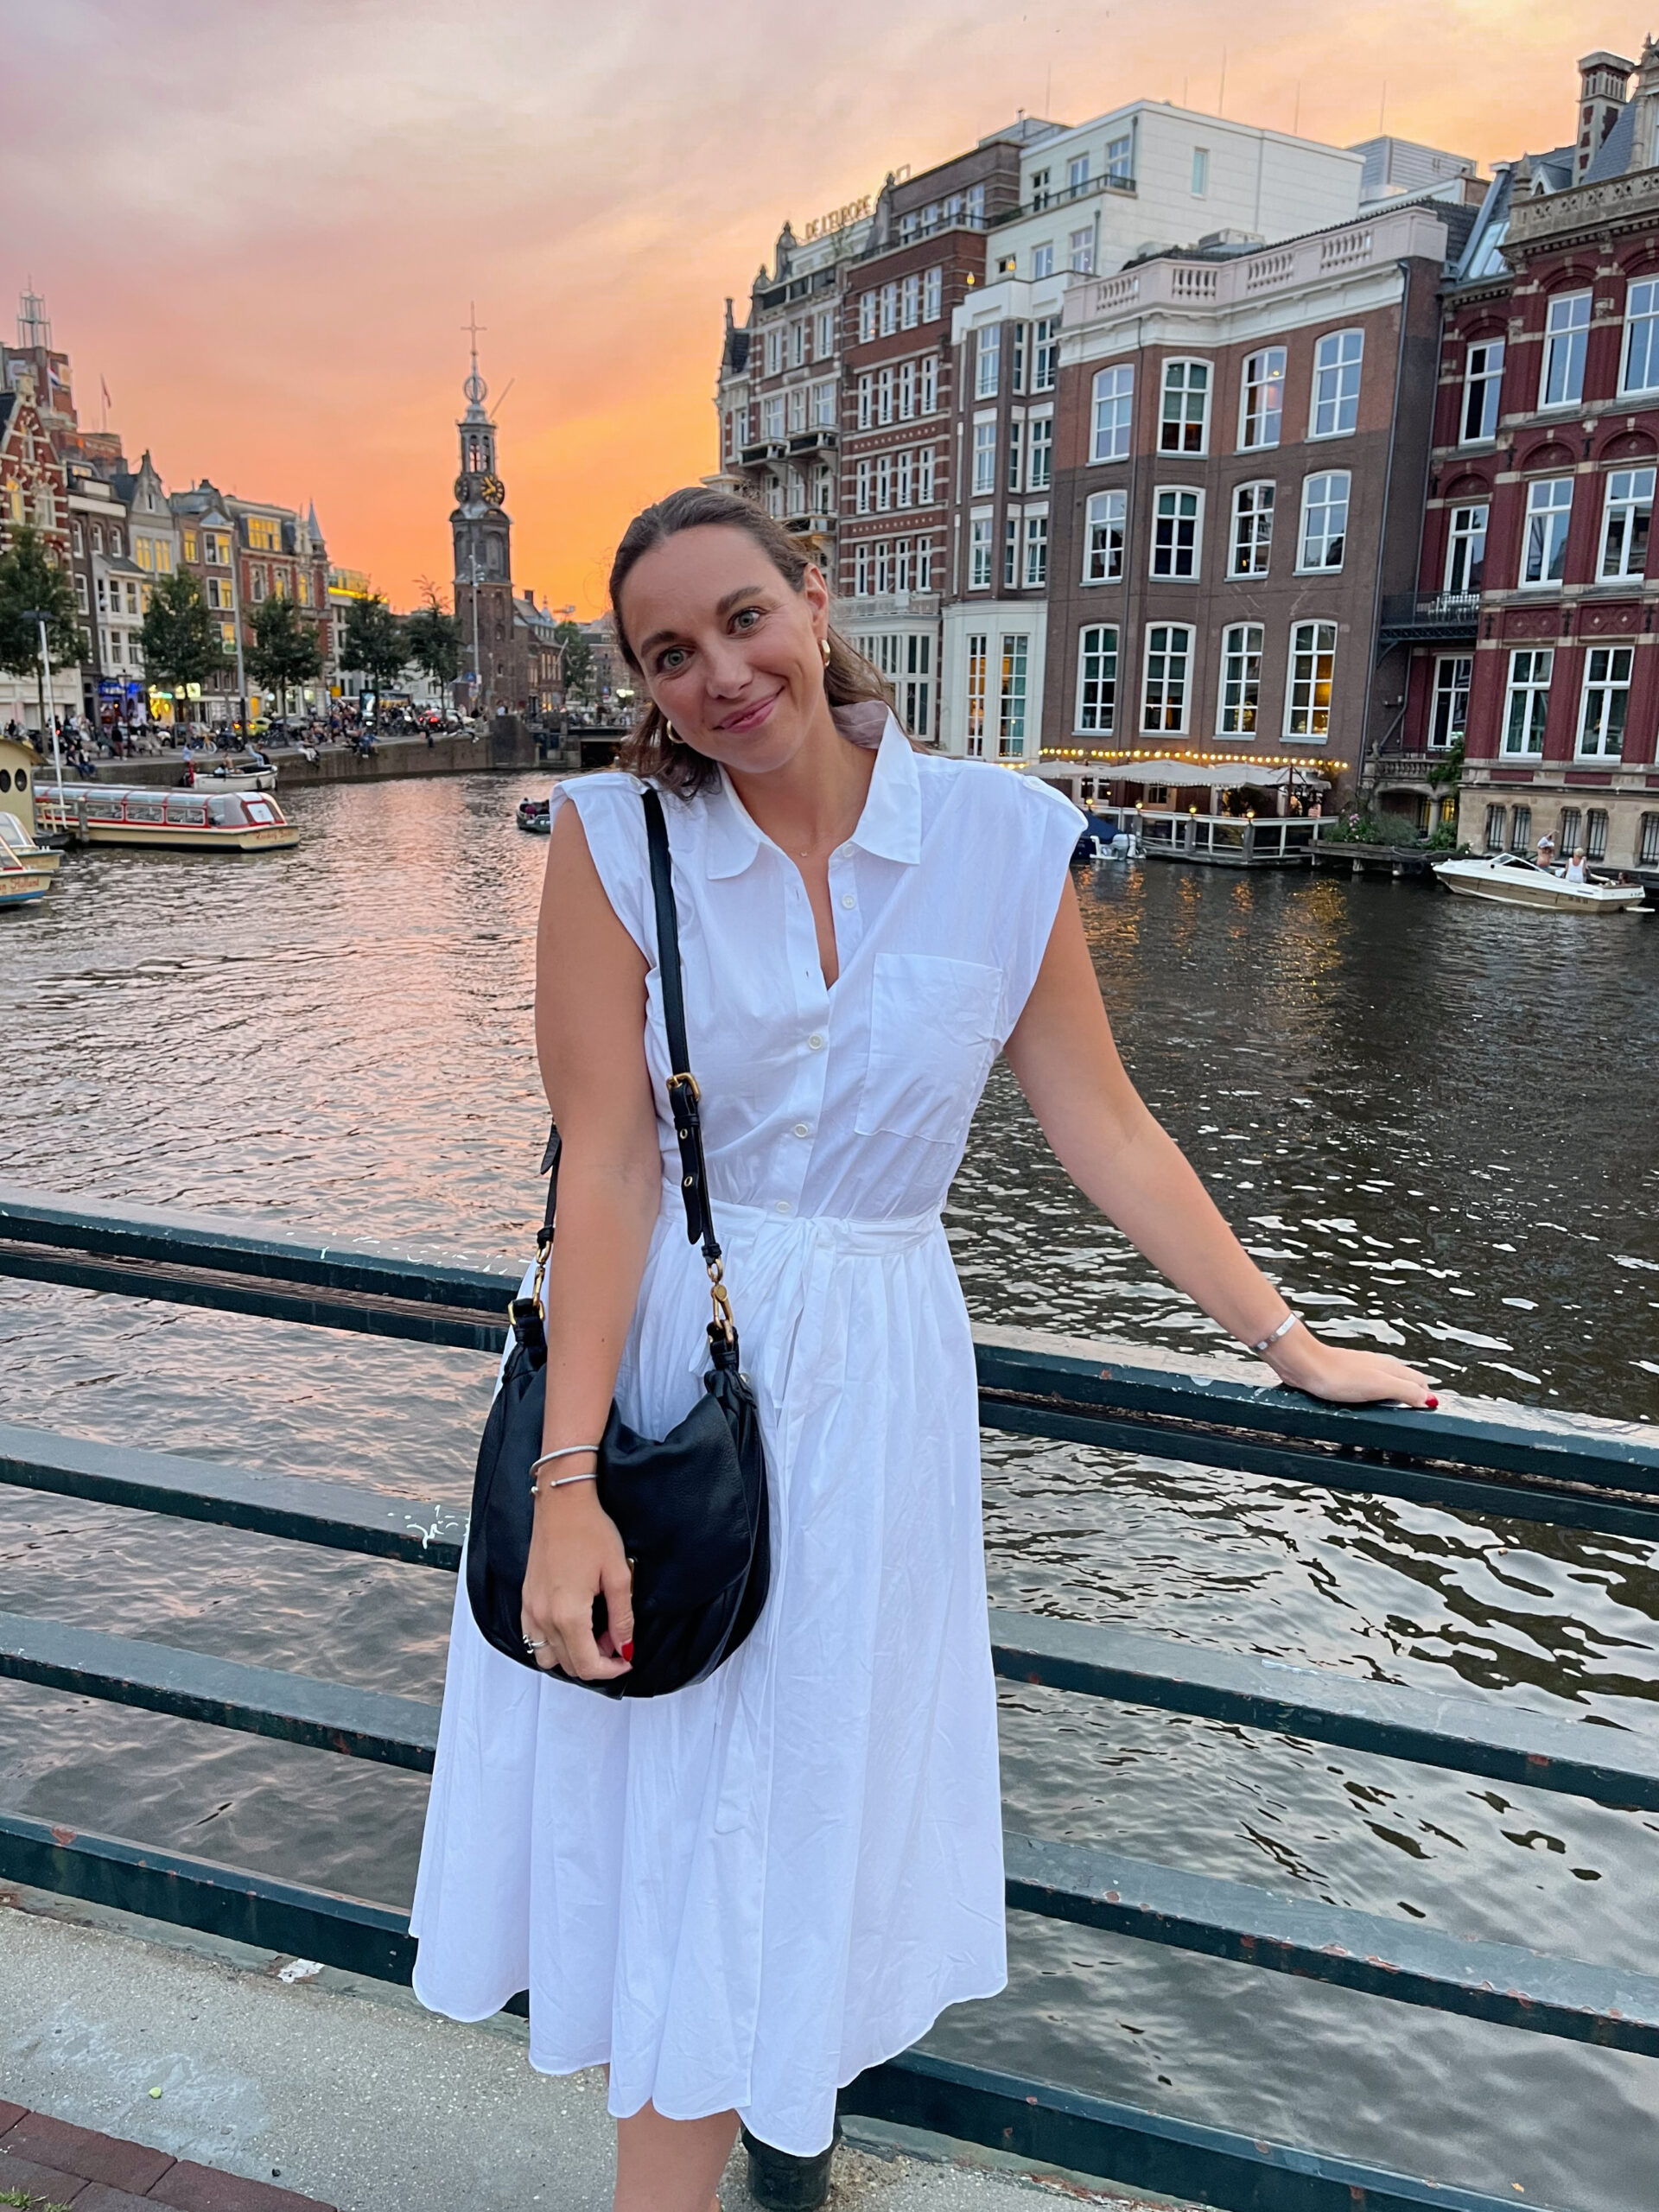 woman in white dress standing on bridge over canal in amsterdam at sunset